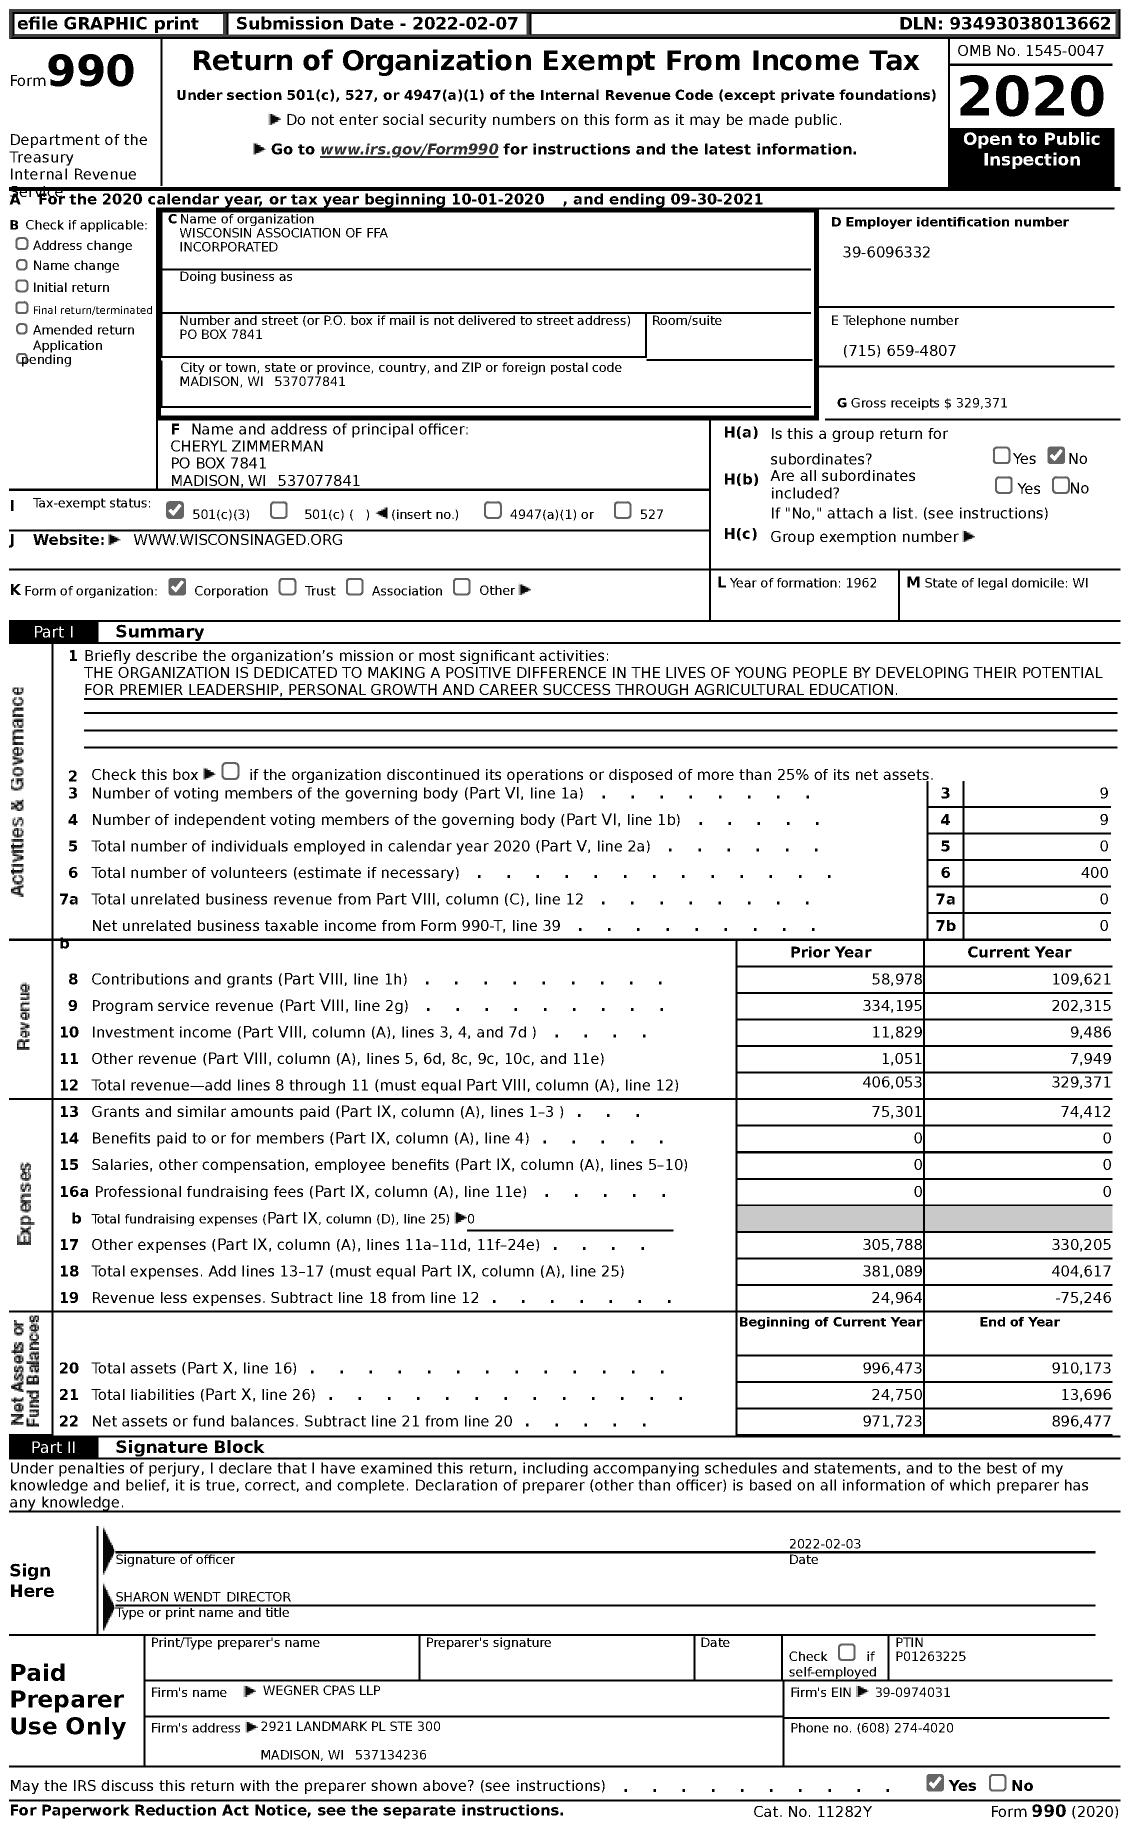 Image of first page of 2020 Form 990 for Wisconsin Association of Ffa Incorporated